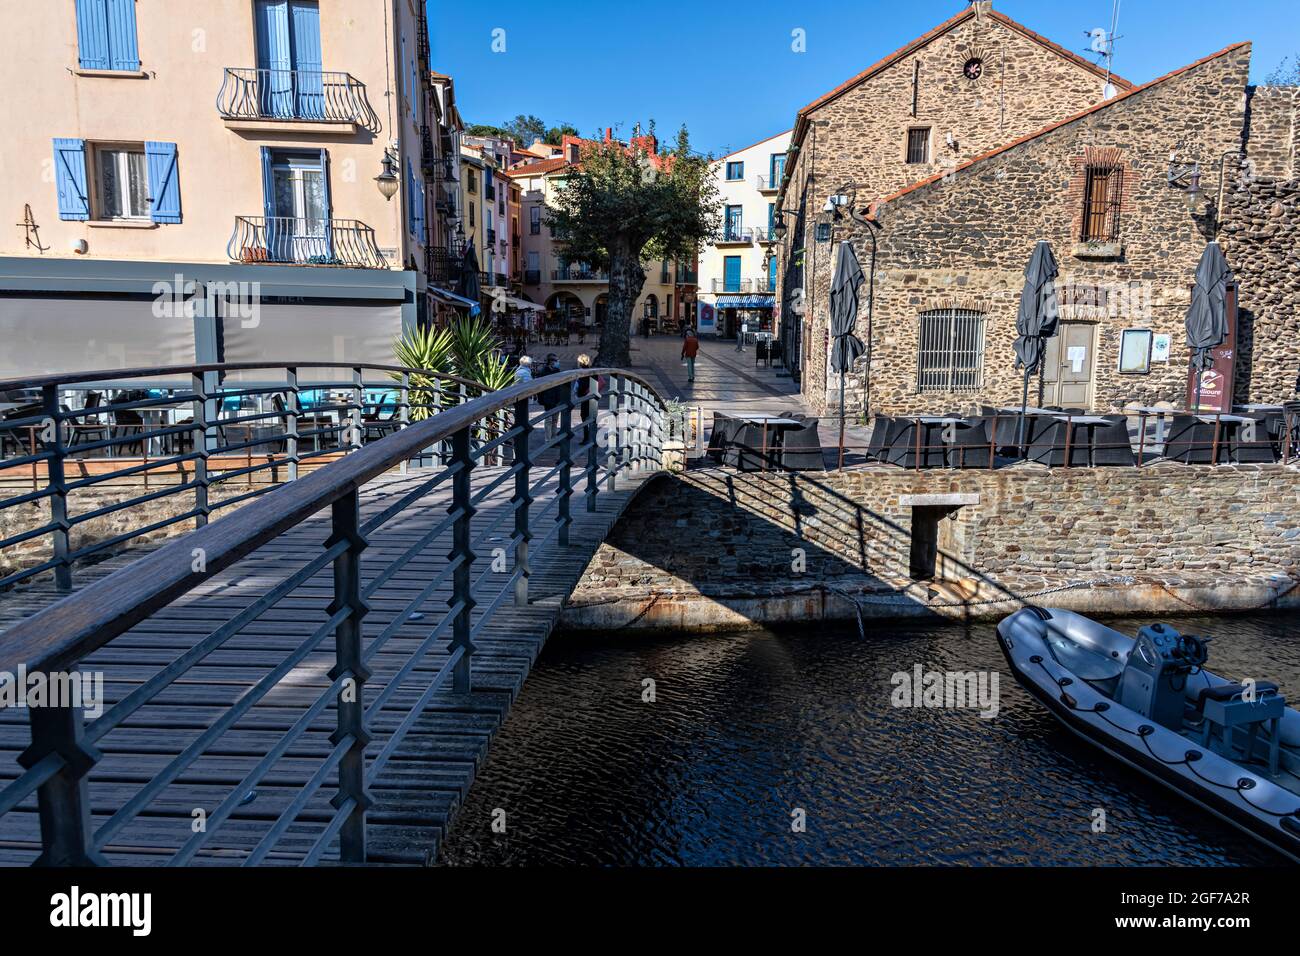 Streets in old town, Collioure, Pyrenees-Orientales, Languedoc-Roussillon, France. Stock Photo